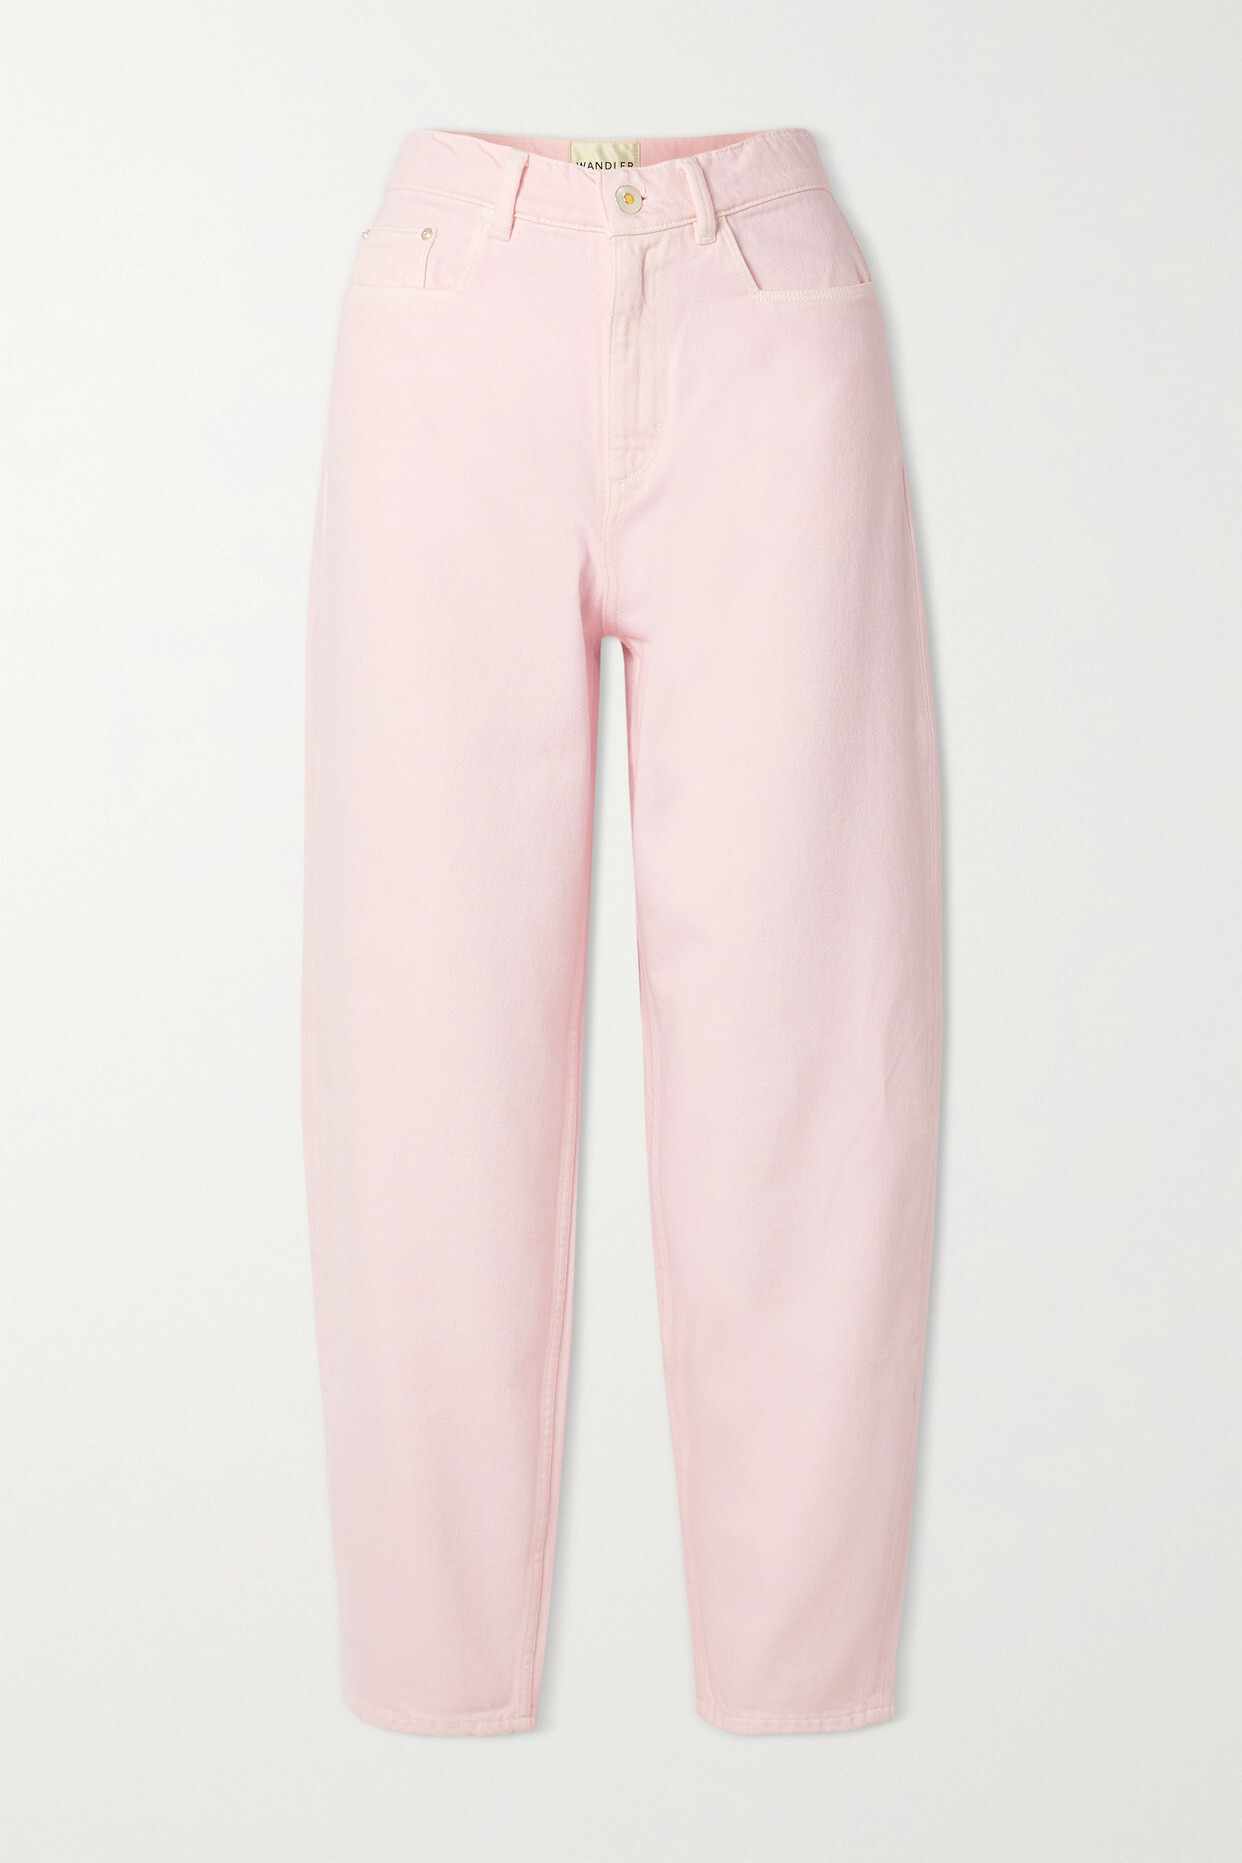 Wandler - Chamomile Organic Cropped High-rise Tapered Jeans - Pink